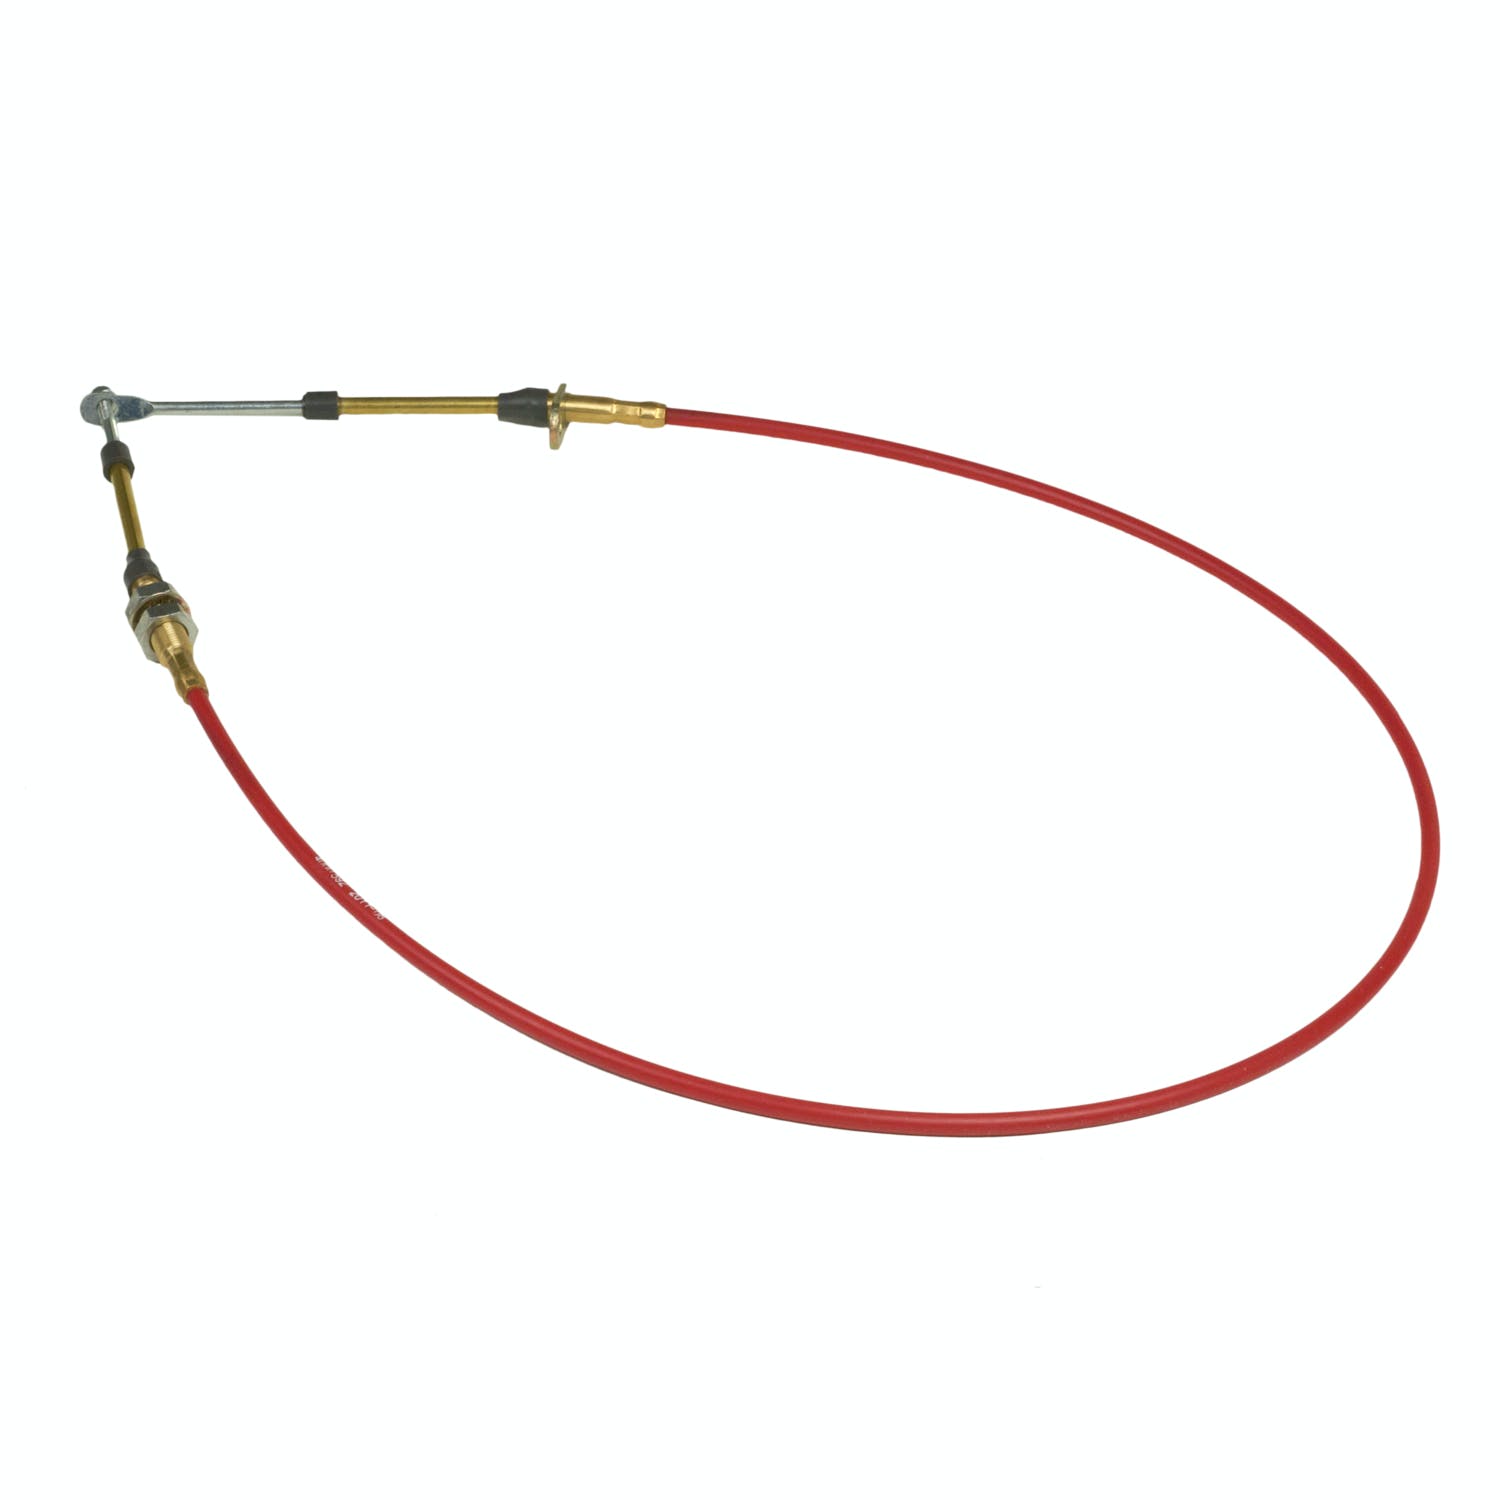 B&M 80605 5FT EYELET END CABLE